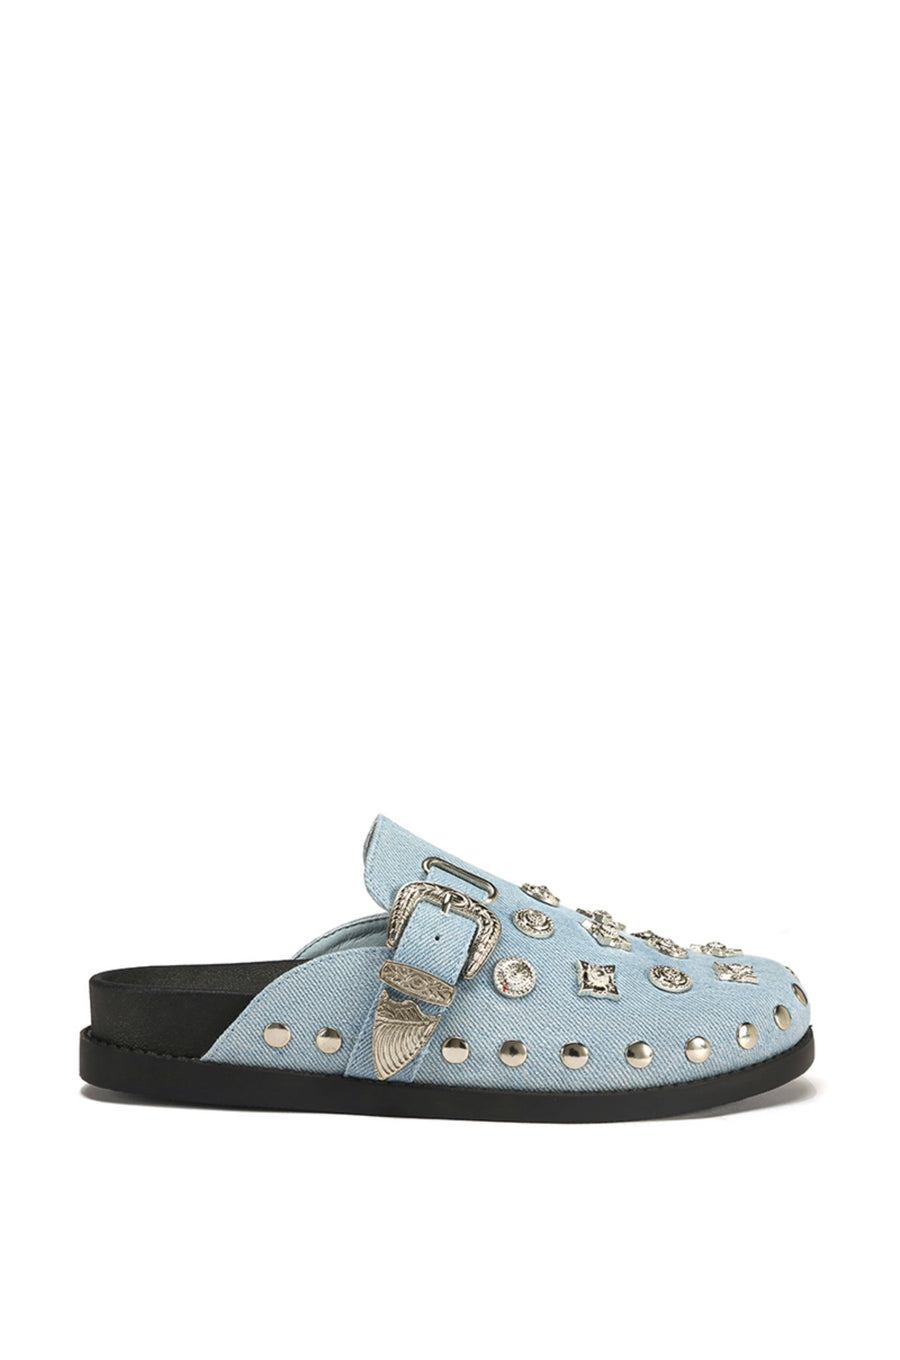 light wash denim slip on western mule with silver studded accents and a western belt buckle detail